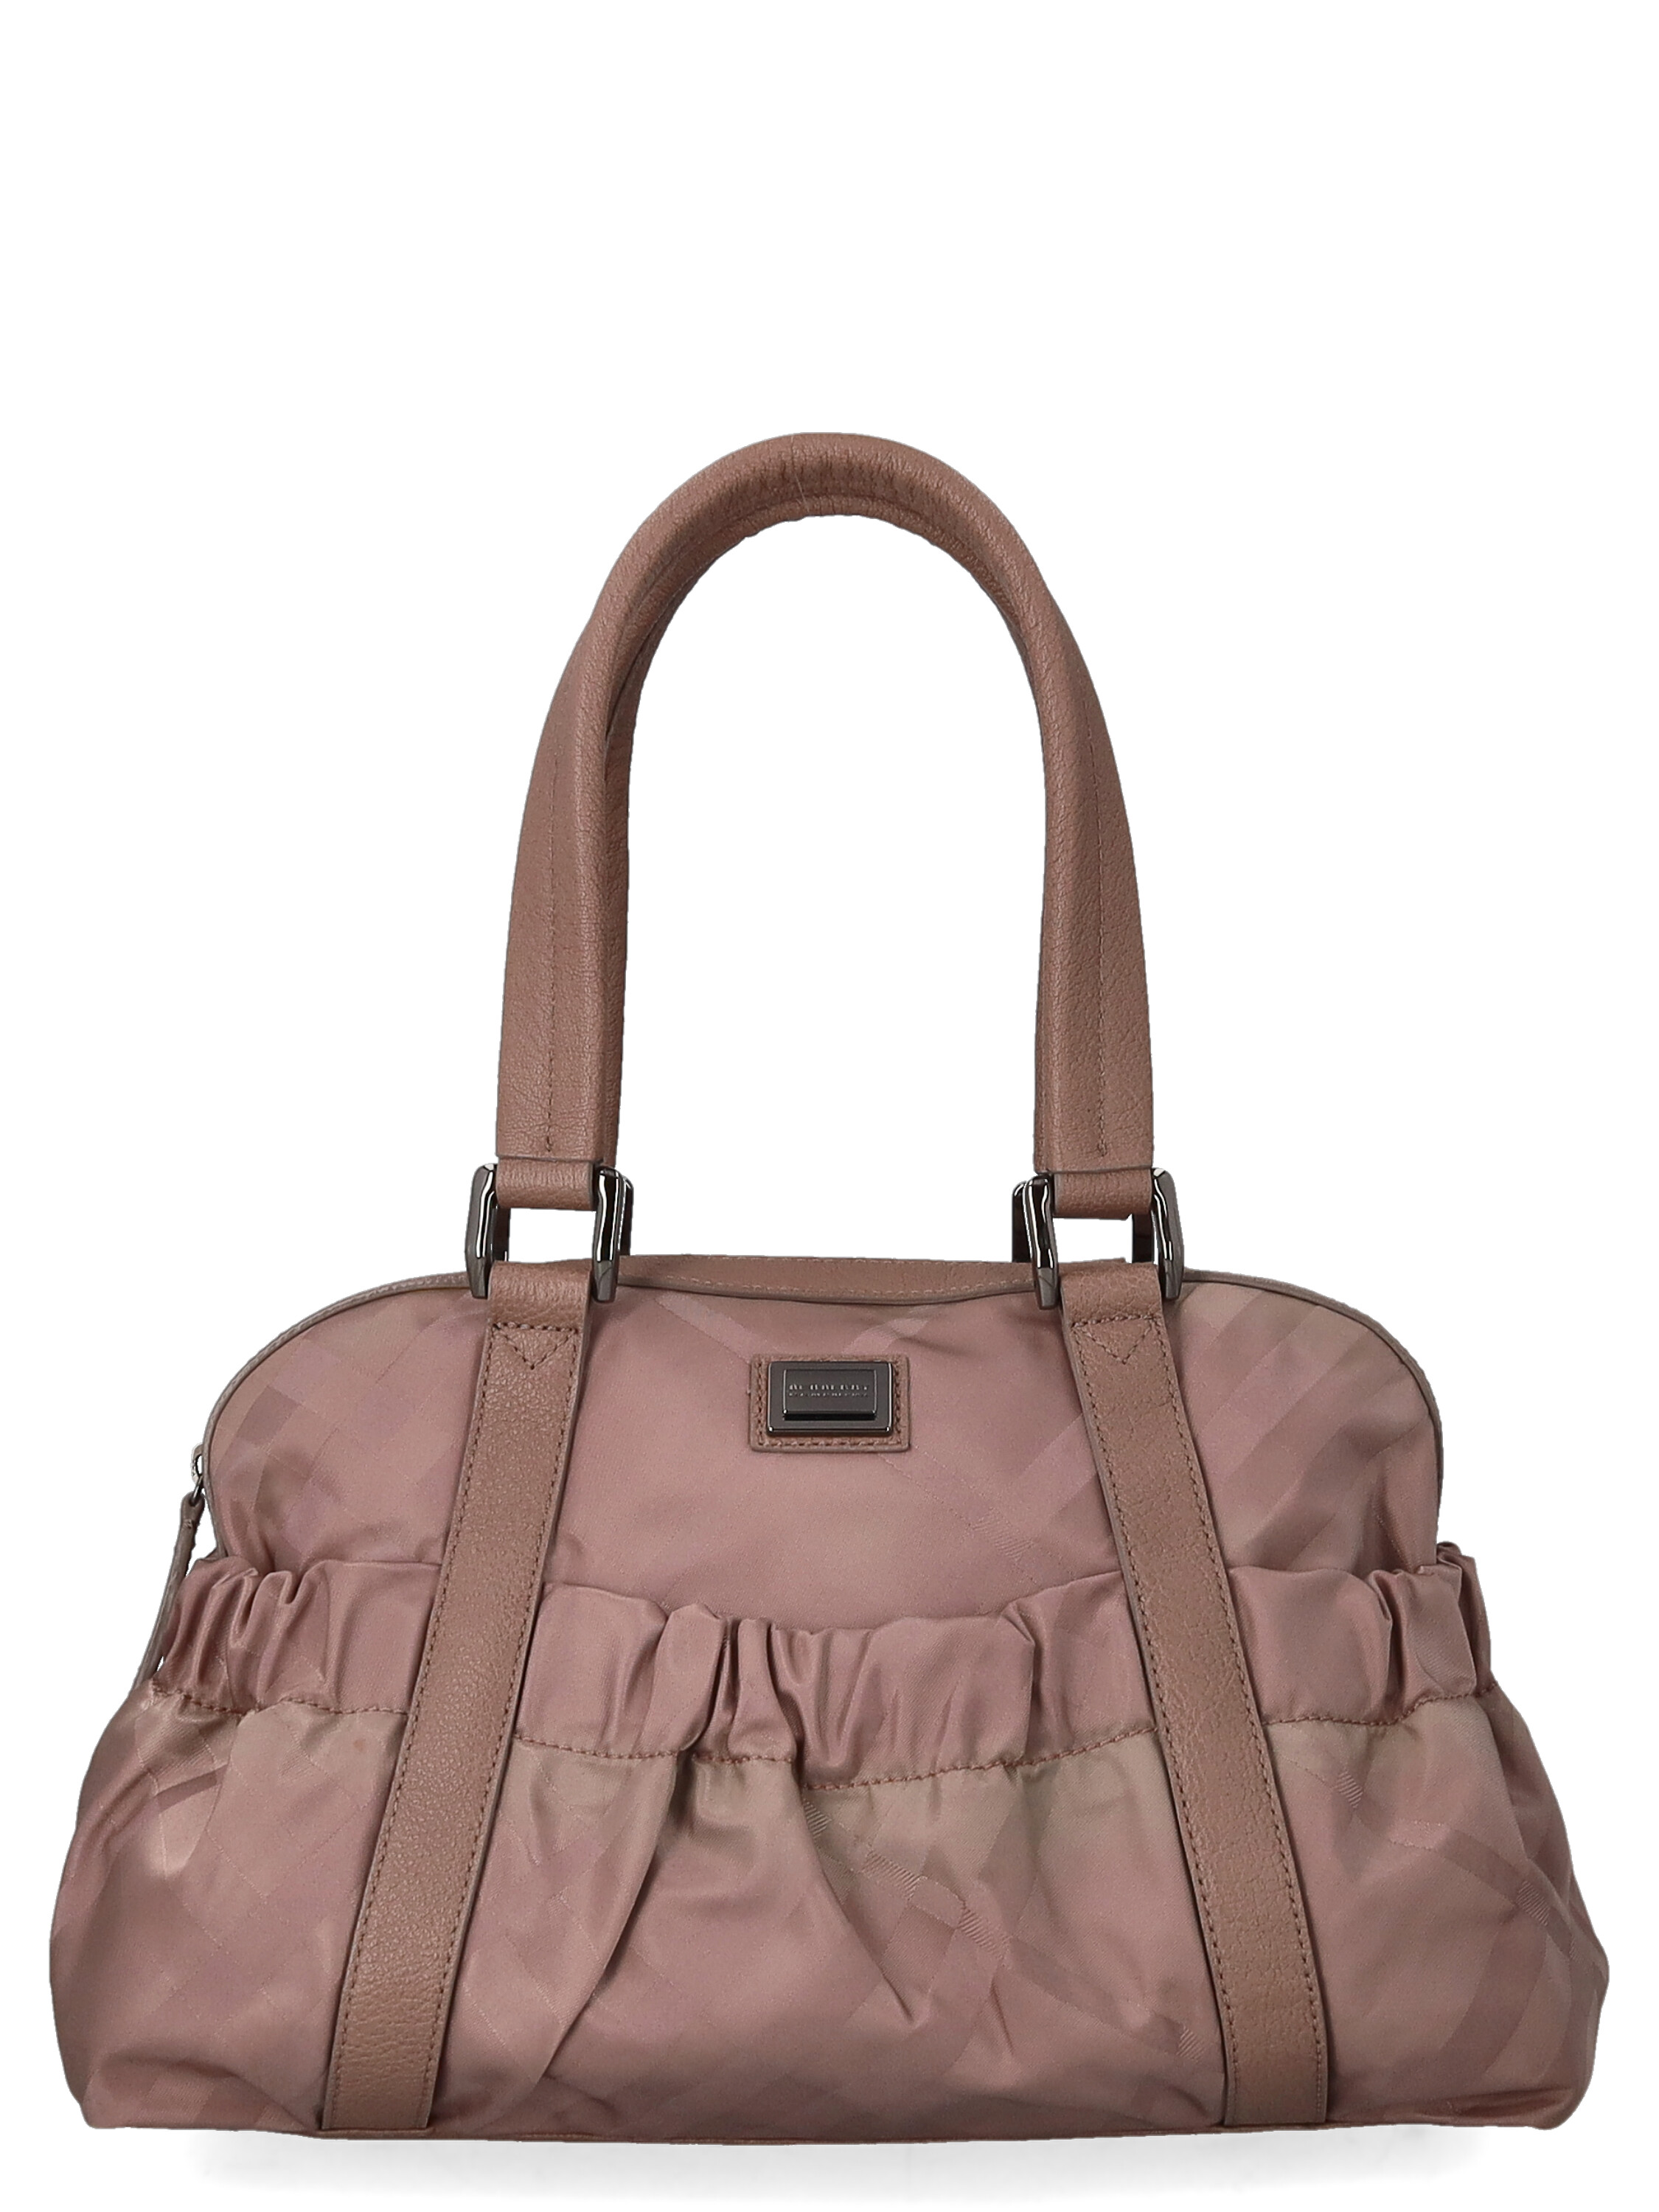 Pre-owned Burberry Women's Handbags -  - In Pink Fabric